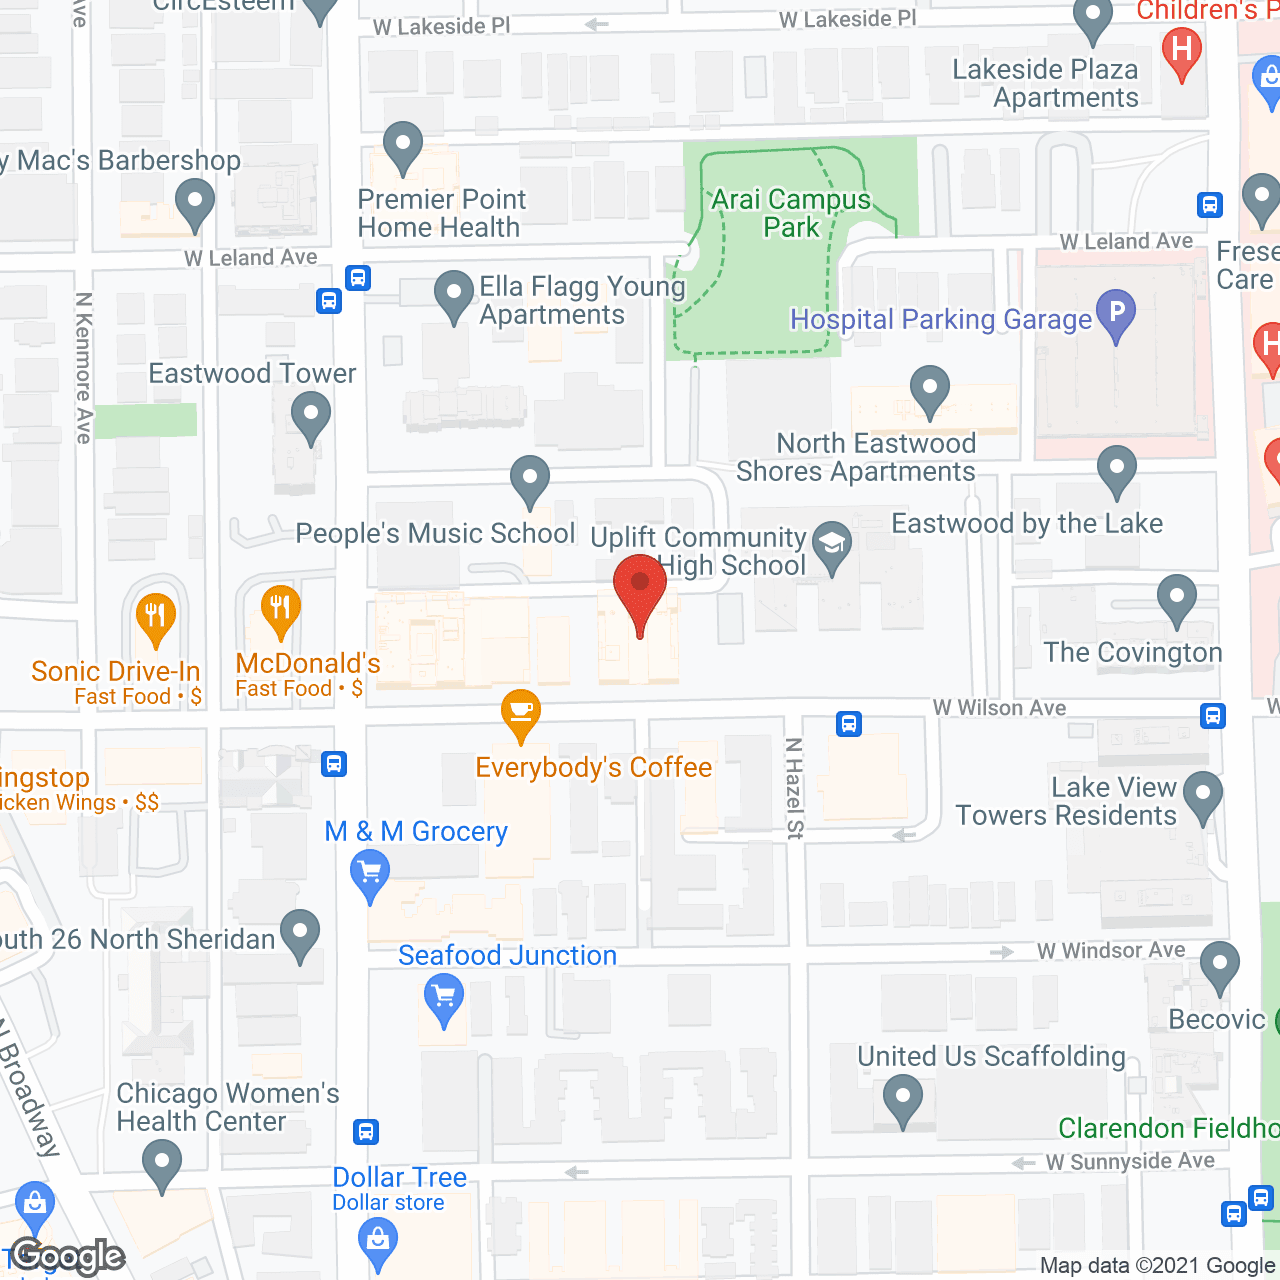 Friendly Towers in google map